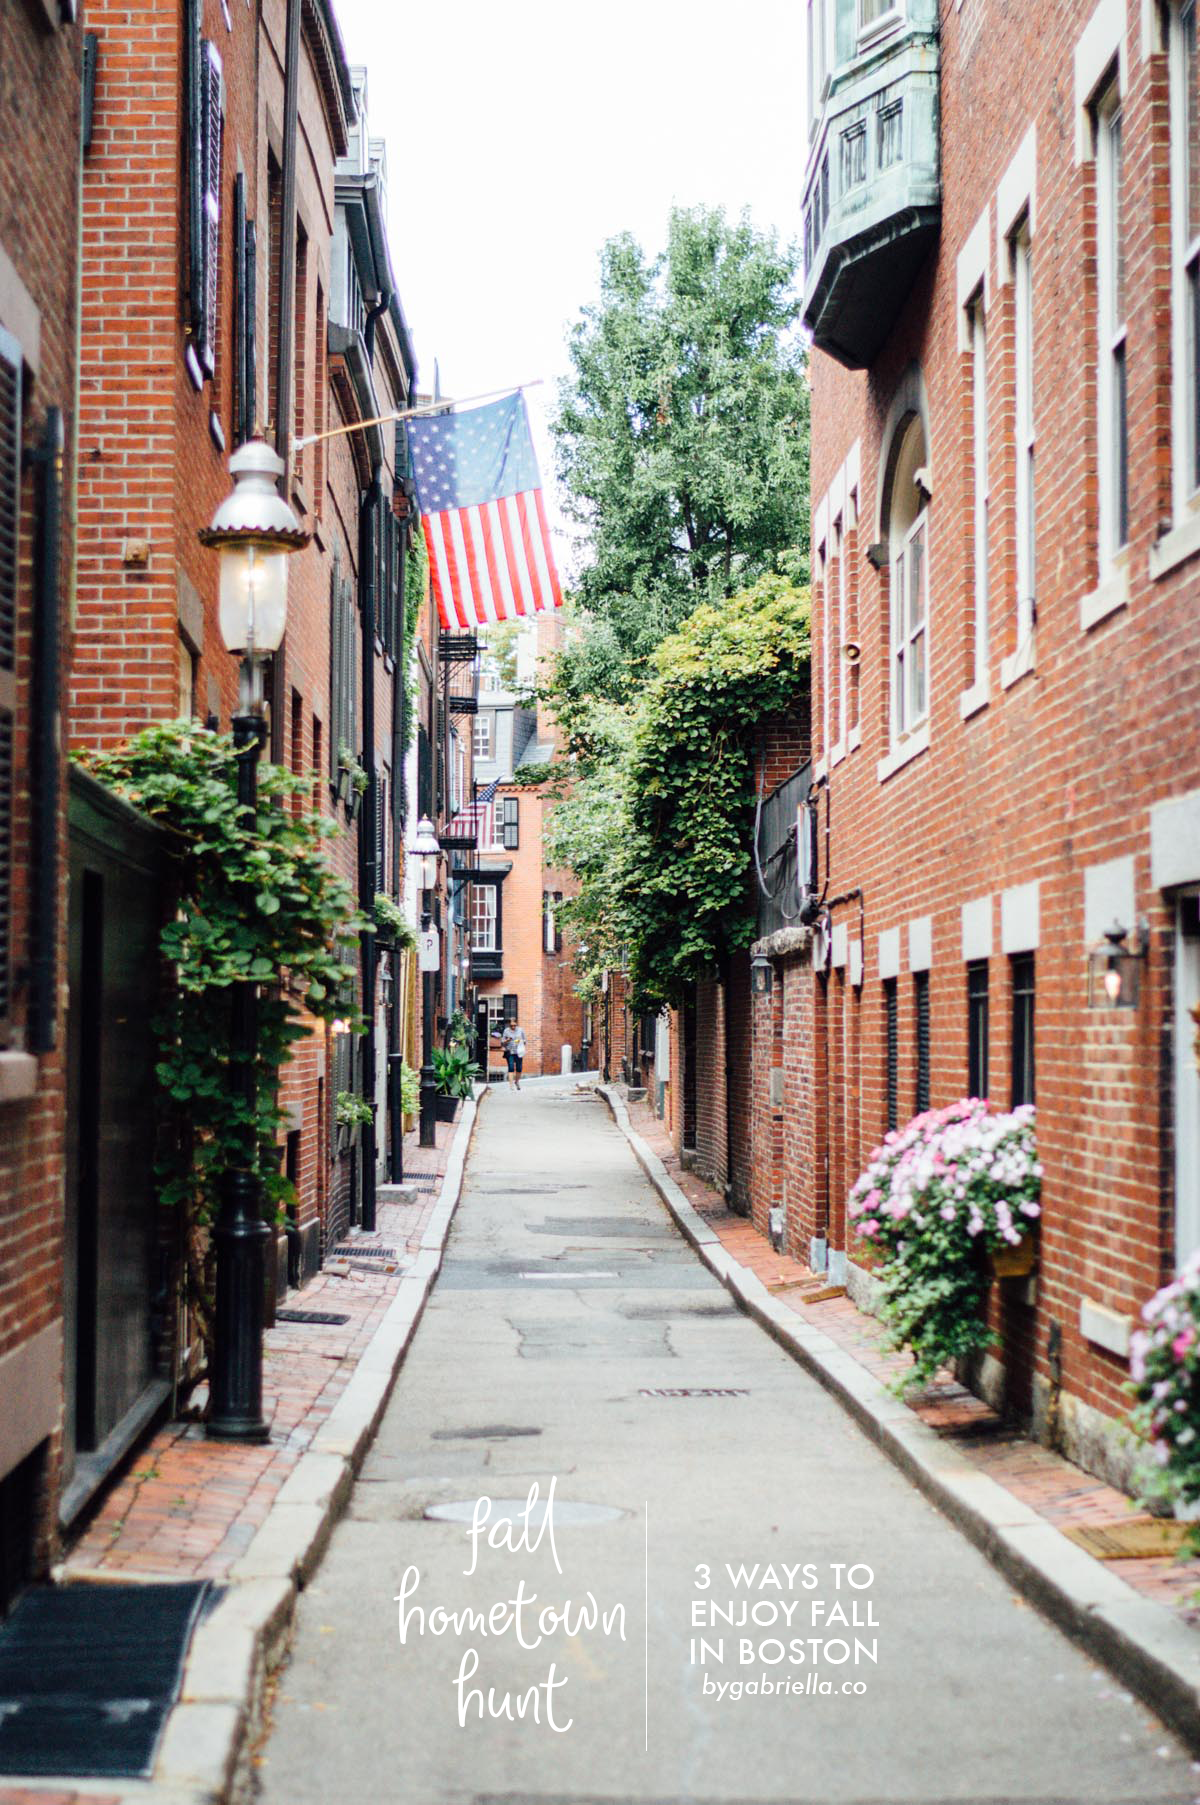 Fall Hometown Hunt: 3 fun ways to enjoy (and welcome!) fall in Boston, including a trip to historic Beacon Hill | bygabriella.co